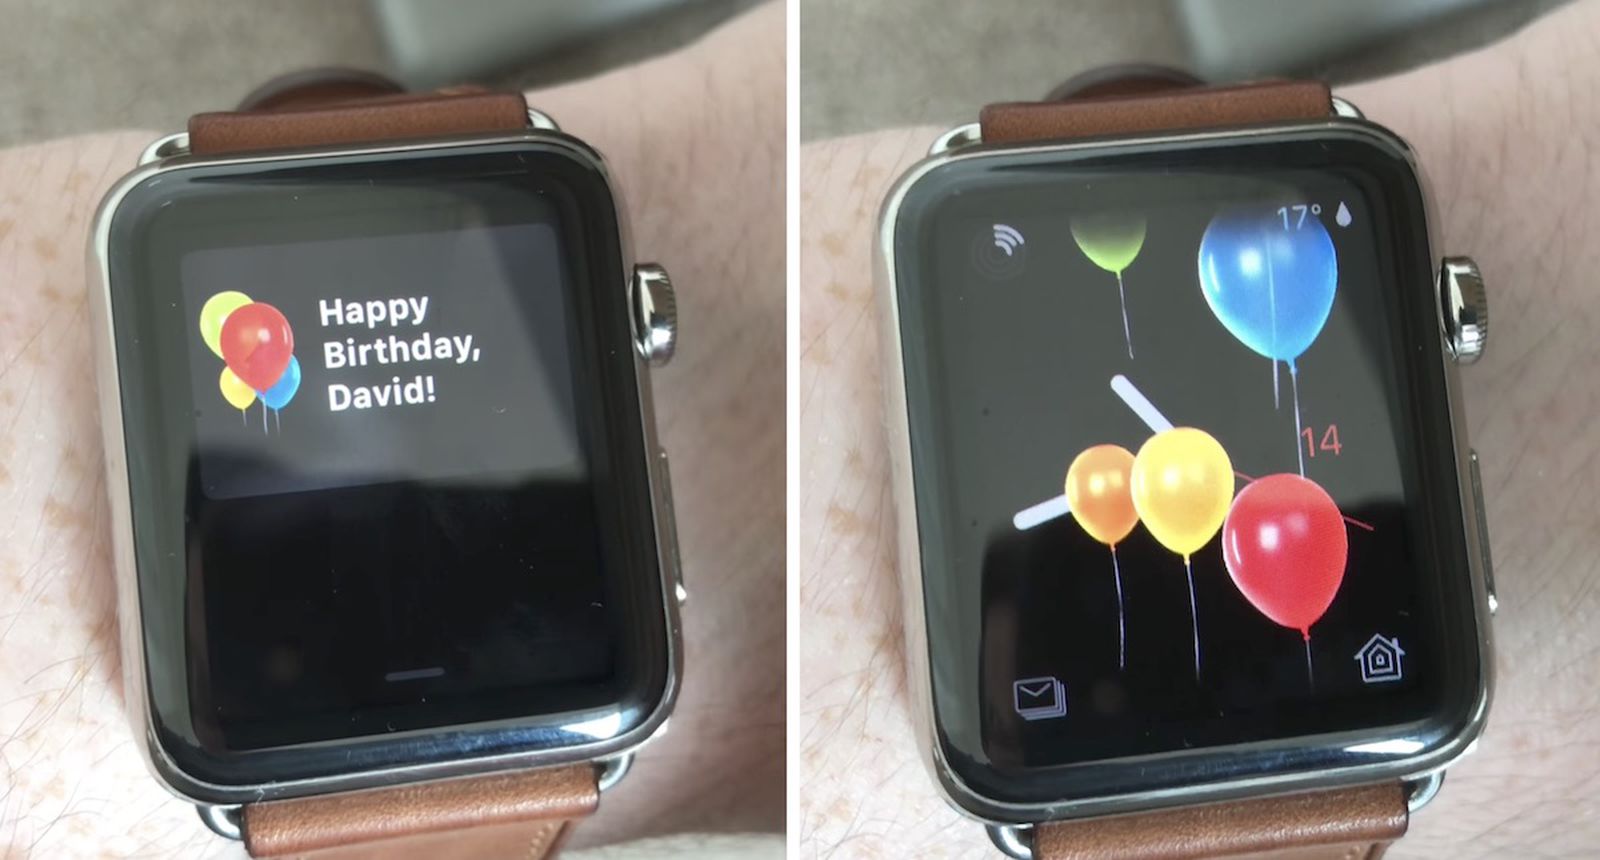 patata Lectura cuidadosa Fanático Apple Watch Celebrates Your Birthday With a Special Message in watchOS 4 -  MacRumors